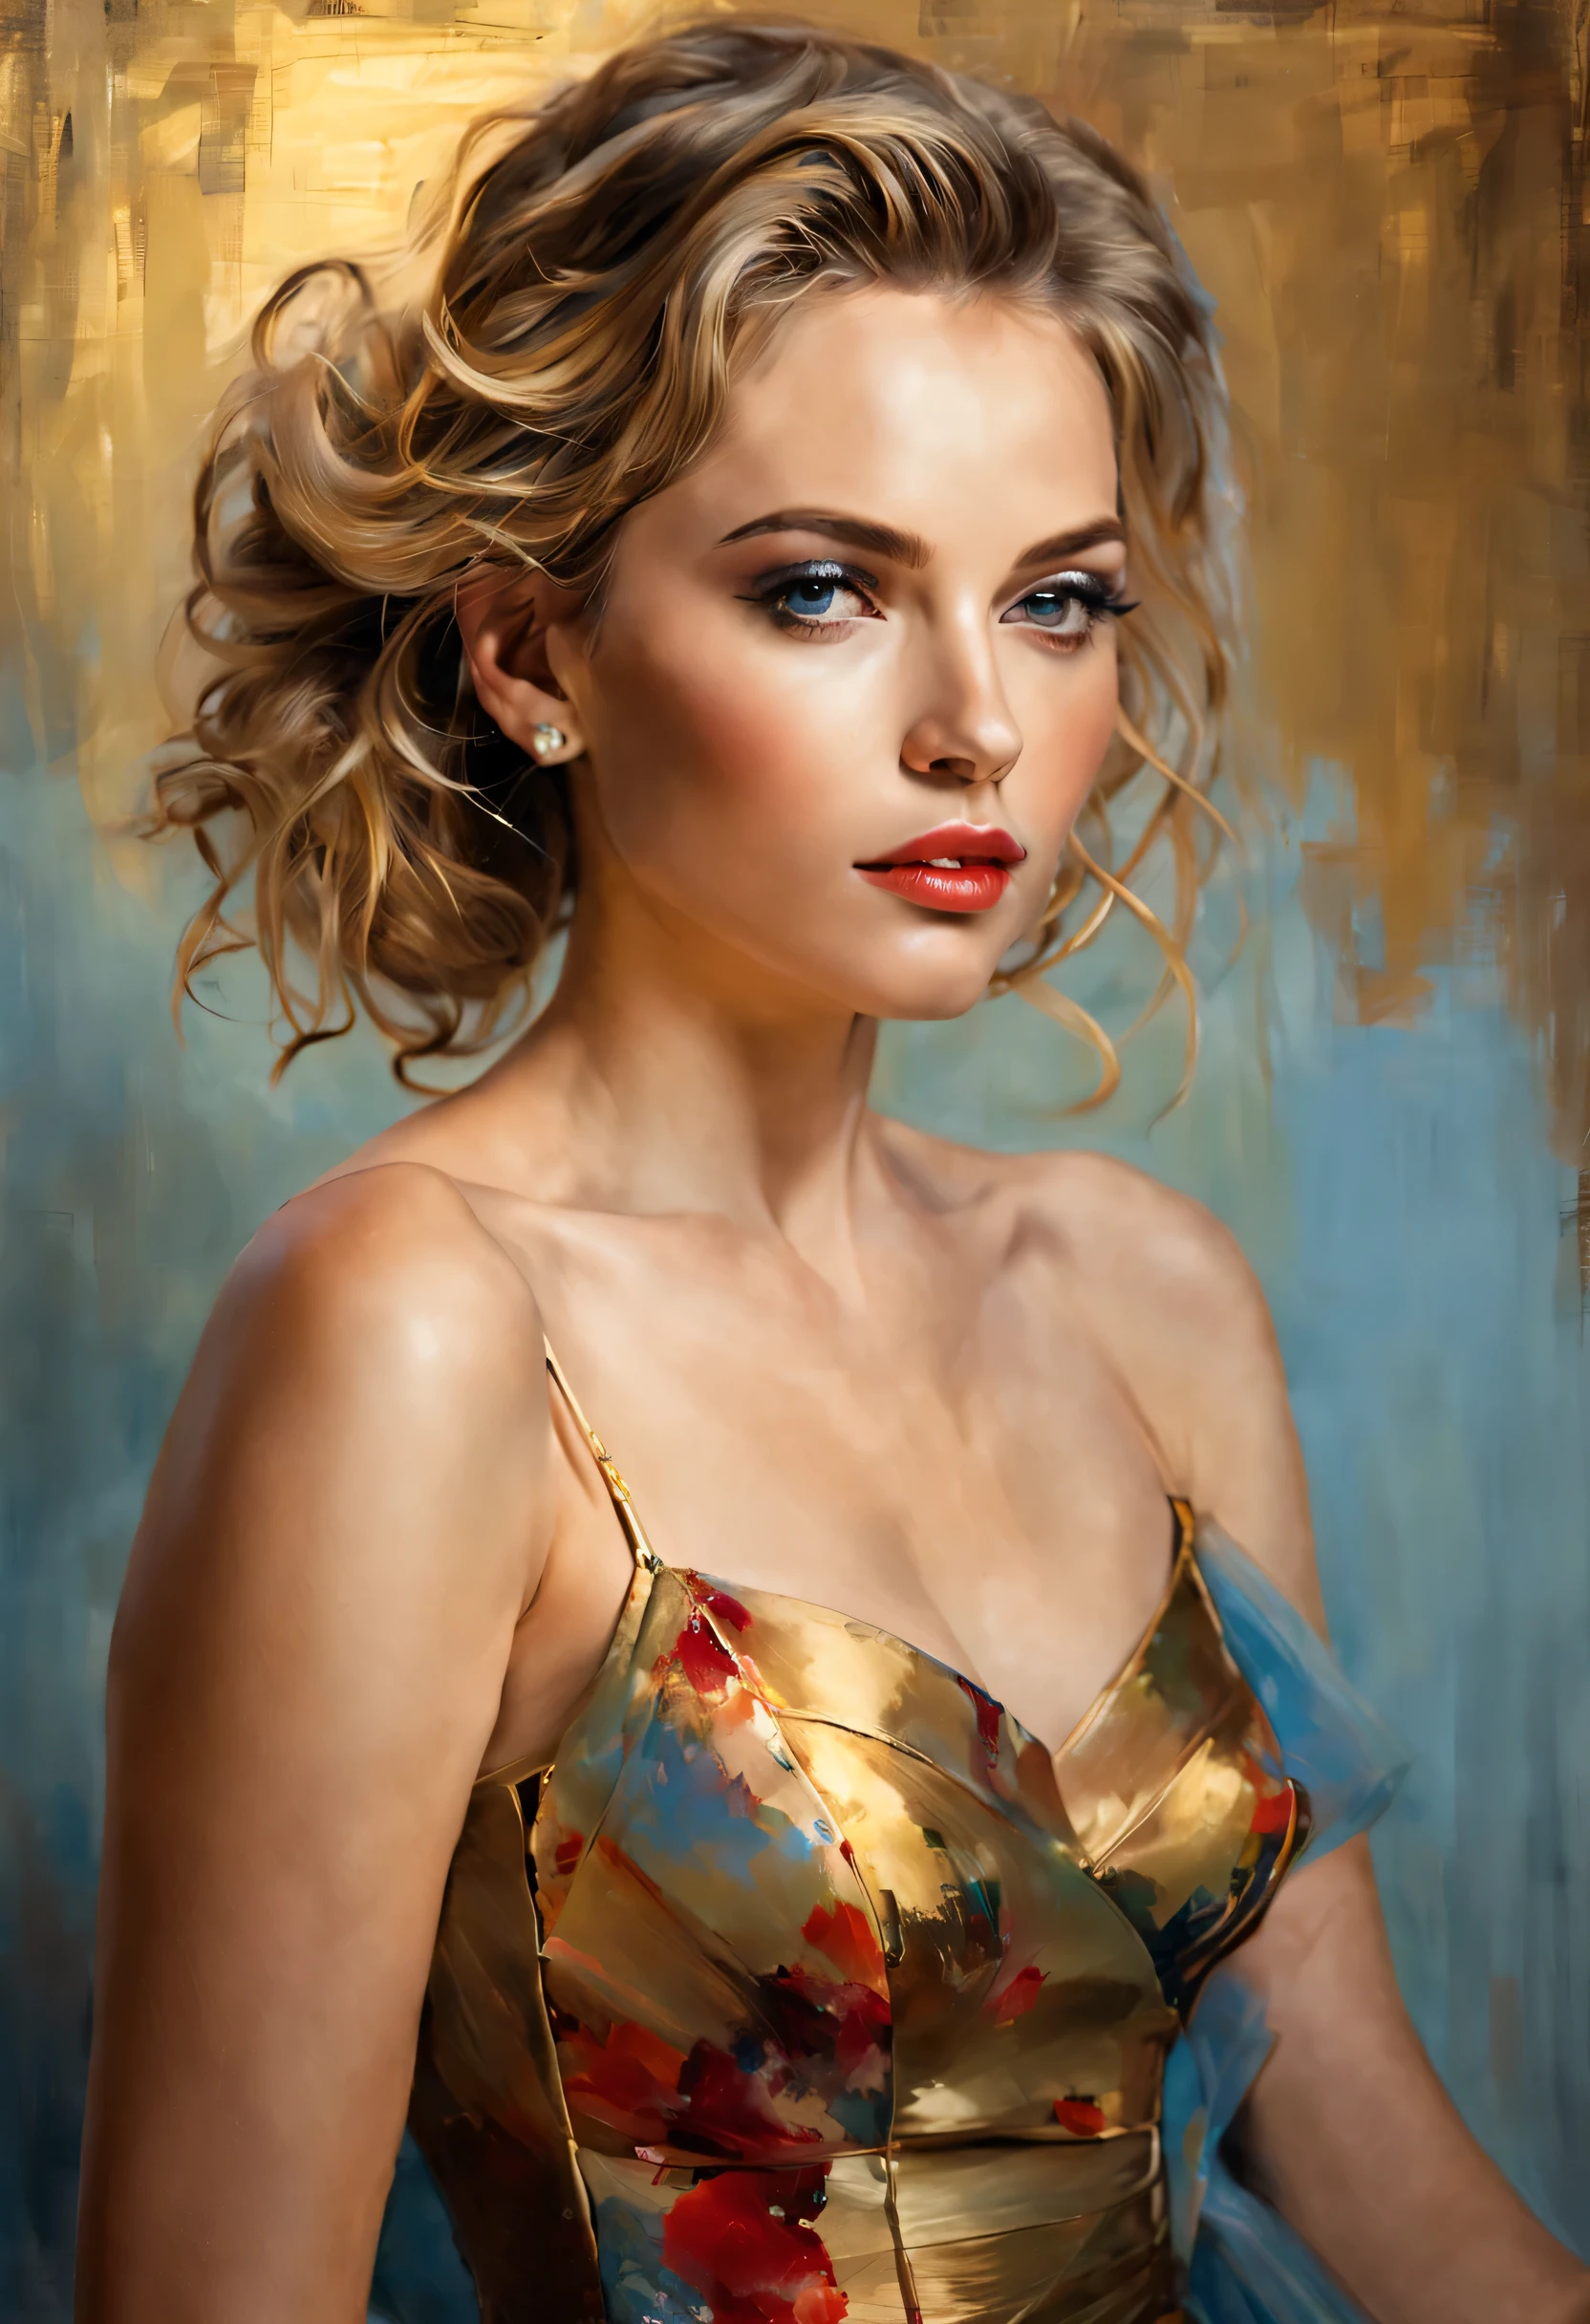 portrait of a beautiful young woman in the style of Philippe de Laszlo, by Michael Garmash, girl in a ball gown, Fine strokes, outlining her features, subtle highlights and shadows, soft lighting illuminating her face and dress Art style: Realistic, oil painting color palette: Rich, warm tones with hints of gold and dark red, contrasts with the cool blue background lighting: soft, diffused light falls on a woman&#39;s face, highlighting her delicate features and the texture of the dress